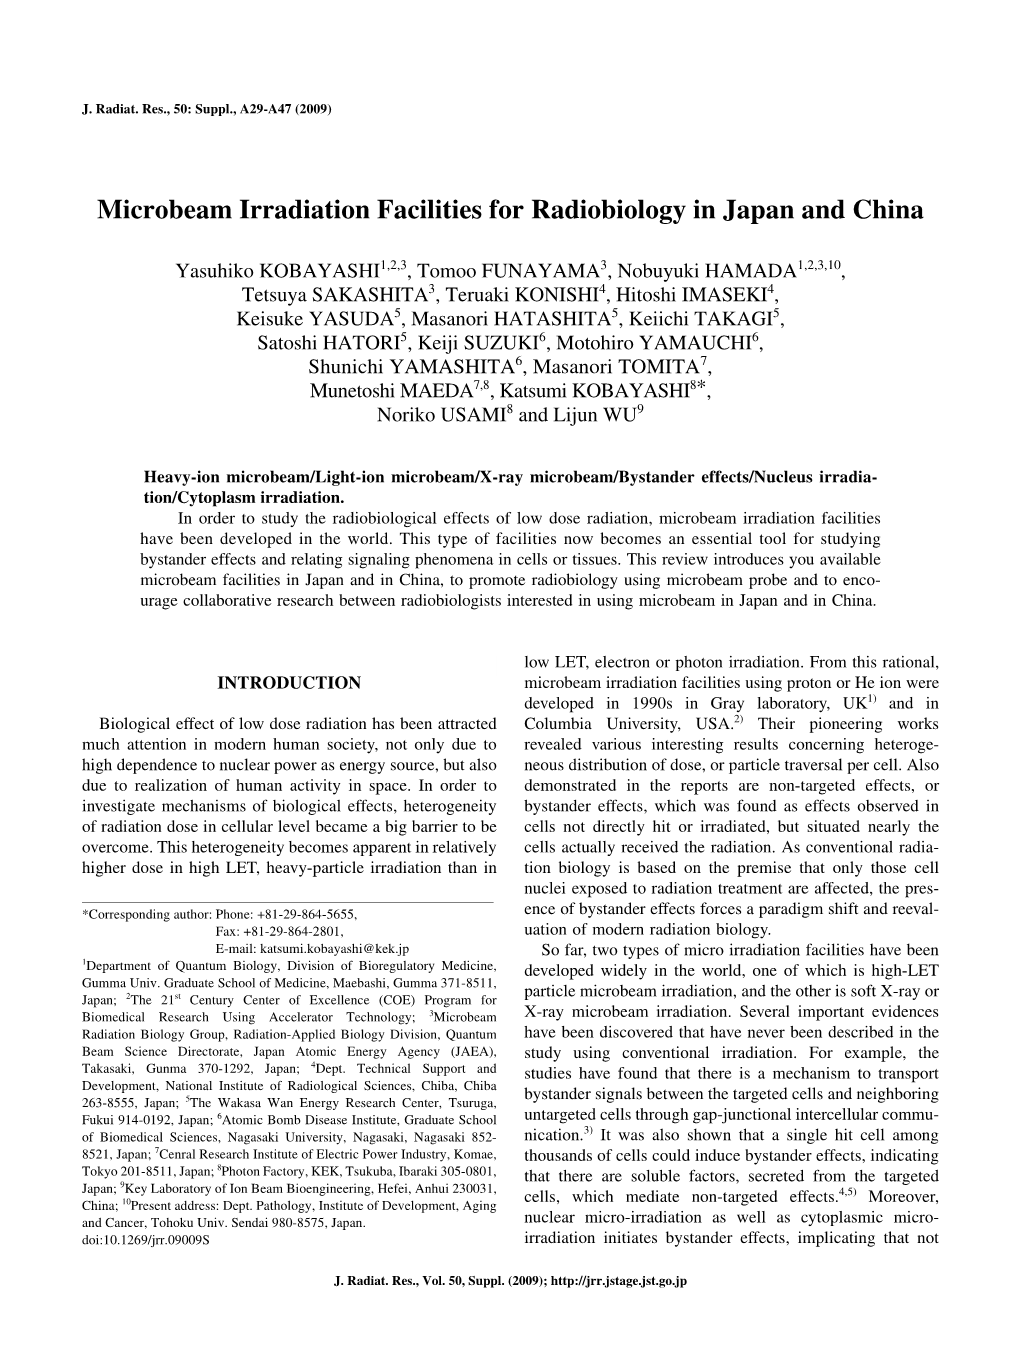 Microbeam Irradiation Facilities for Radiobiology in Japan and China